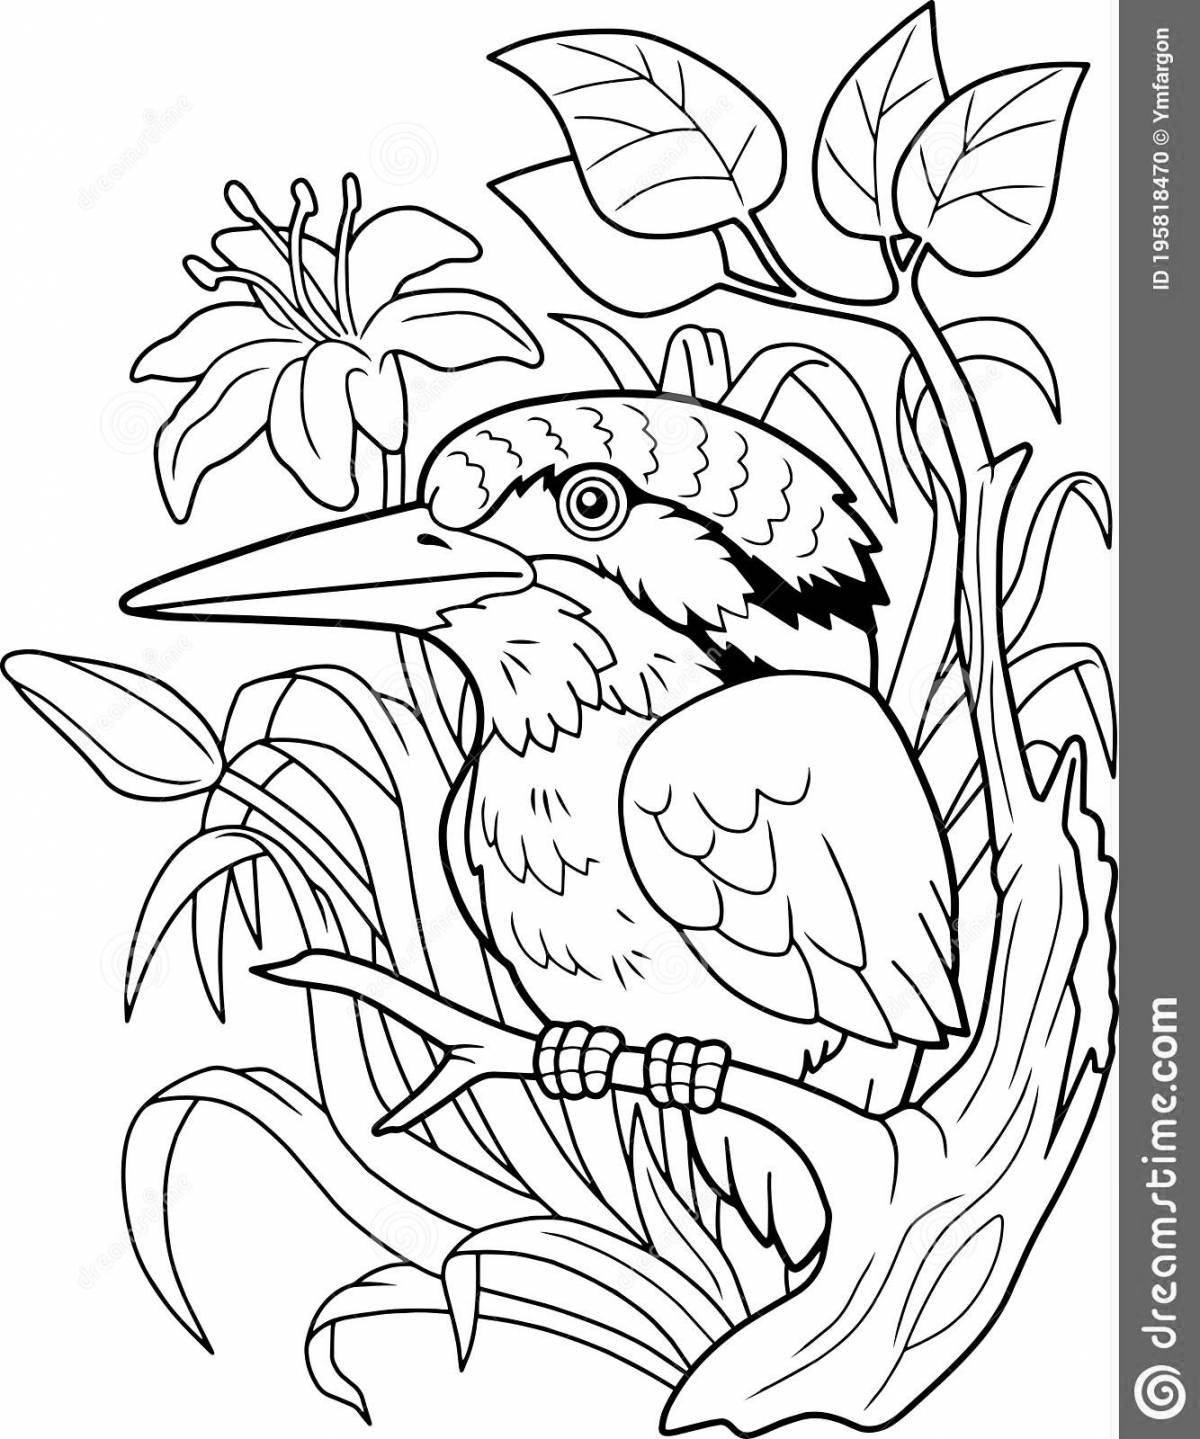 Kingfisher coloring page